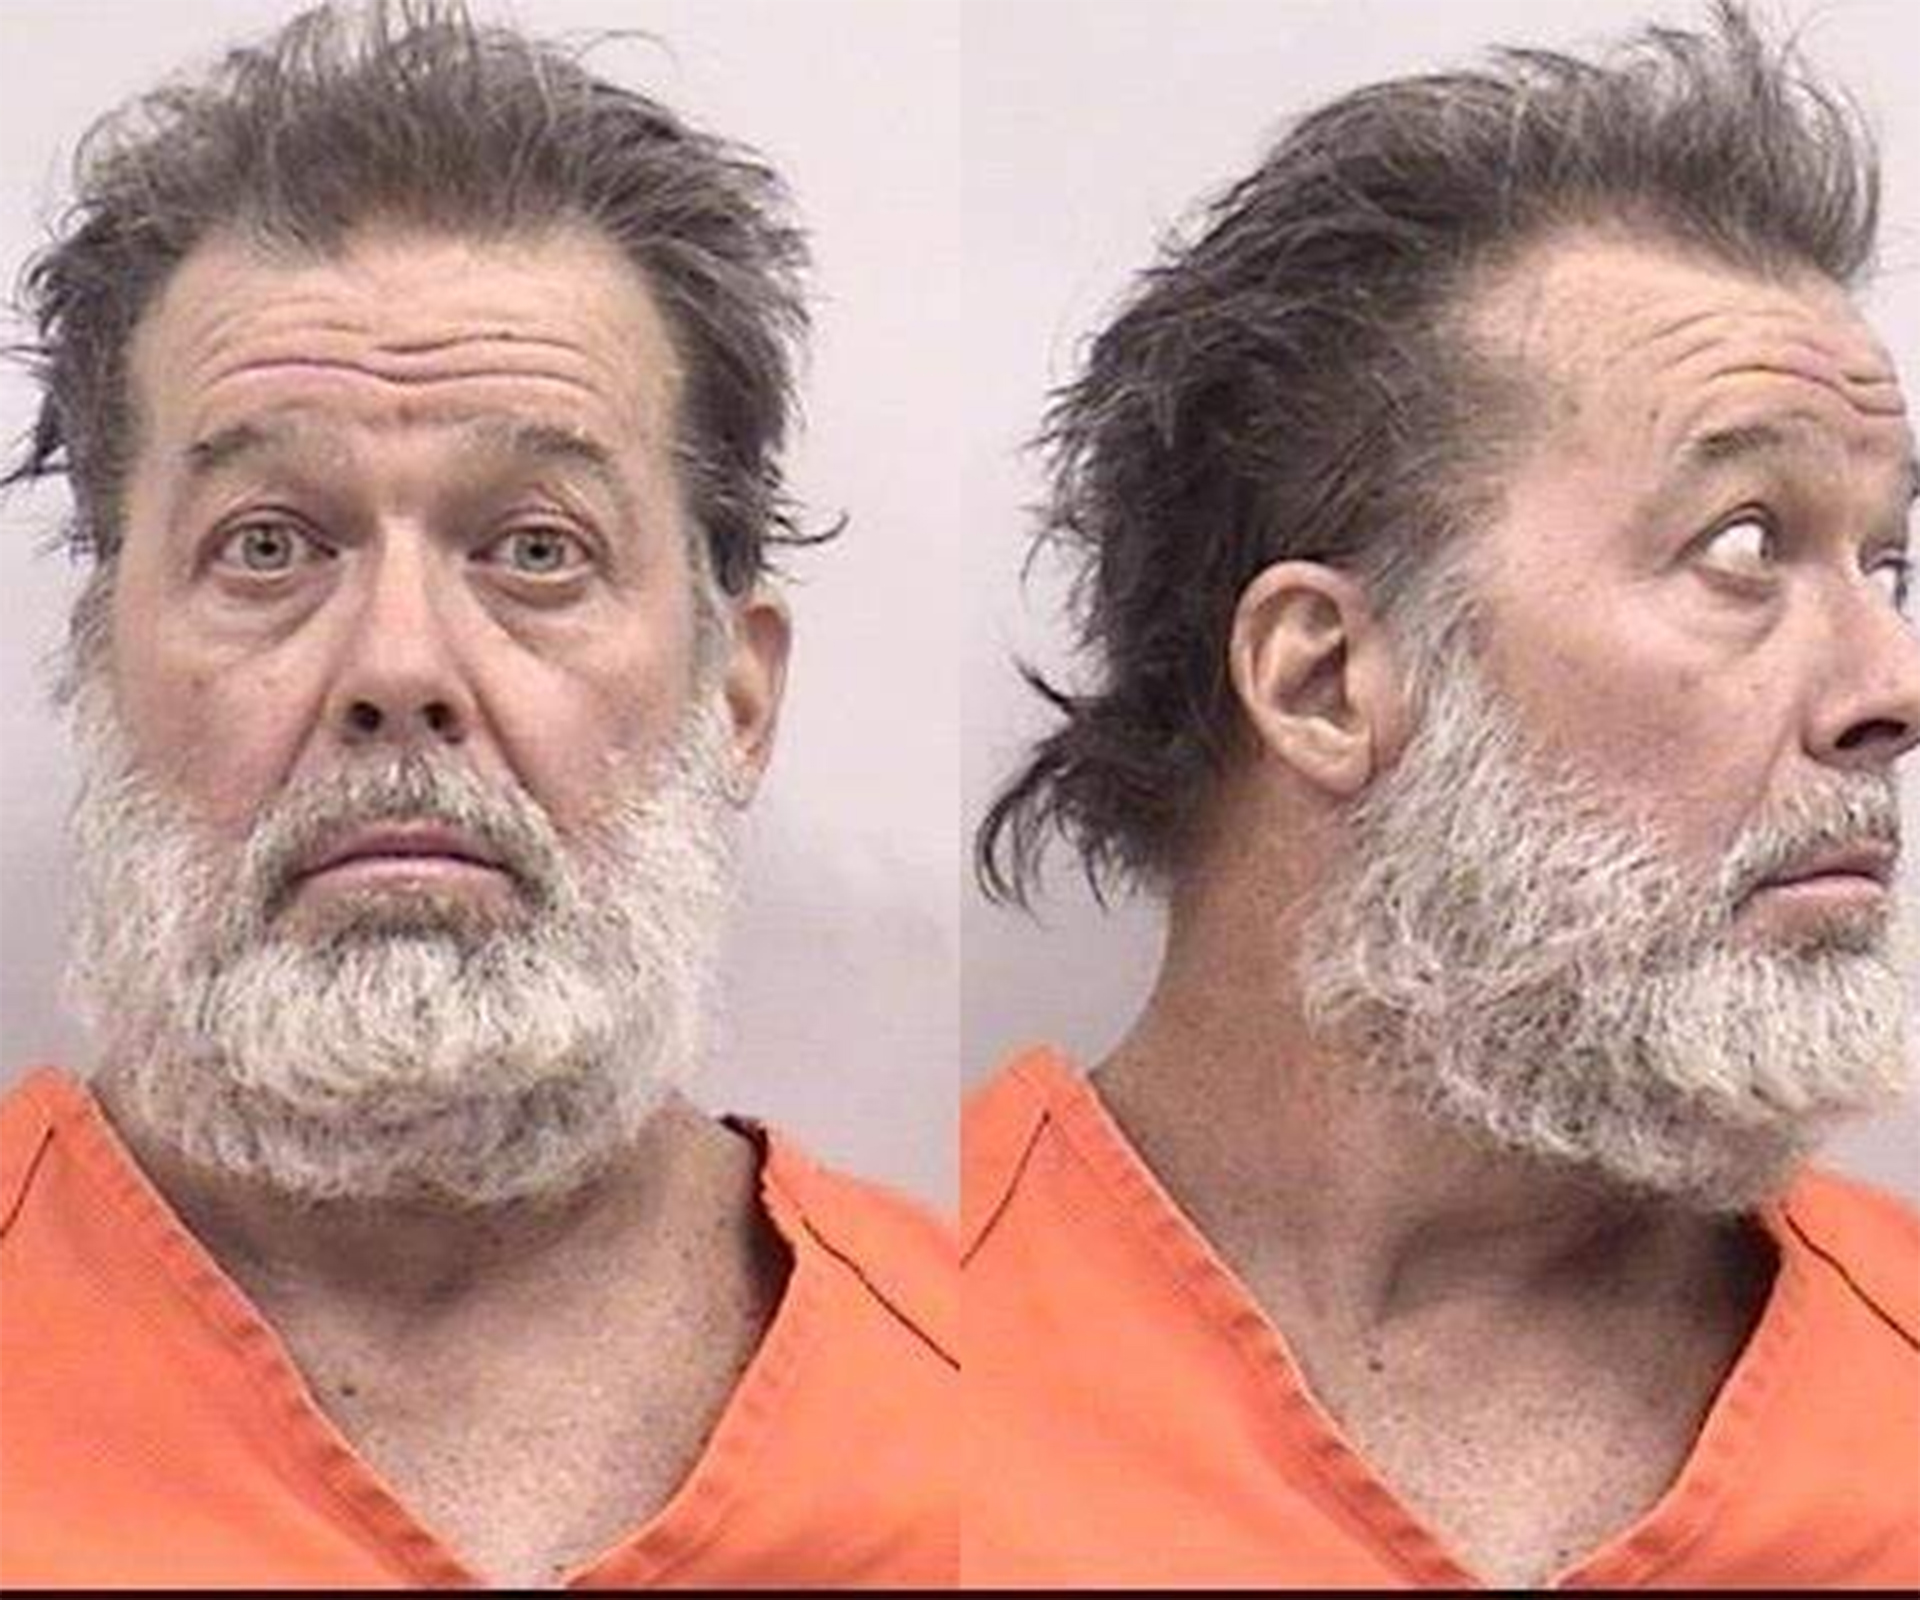 Planned Parenthood shooter’s bizarre guilty plea: “I’m a warrior for the babies”